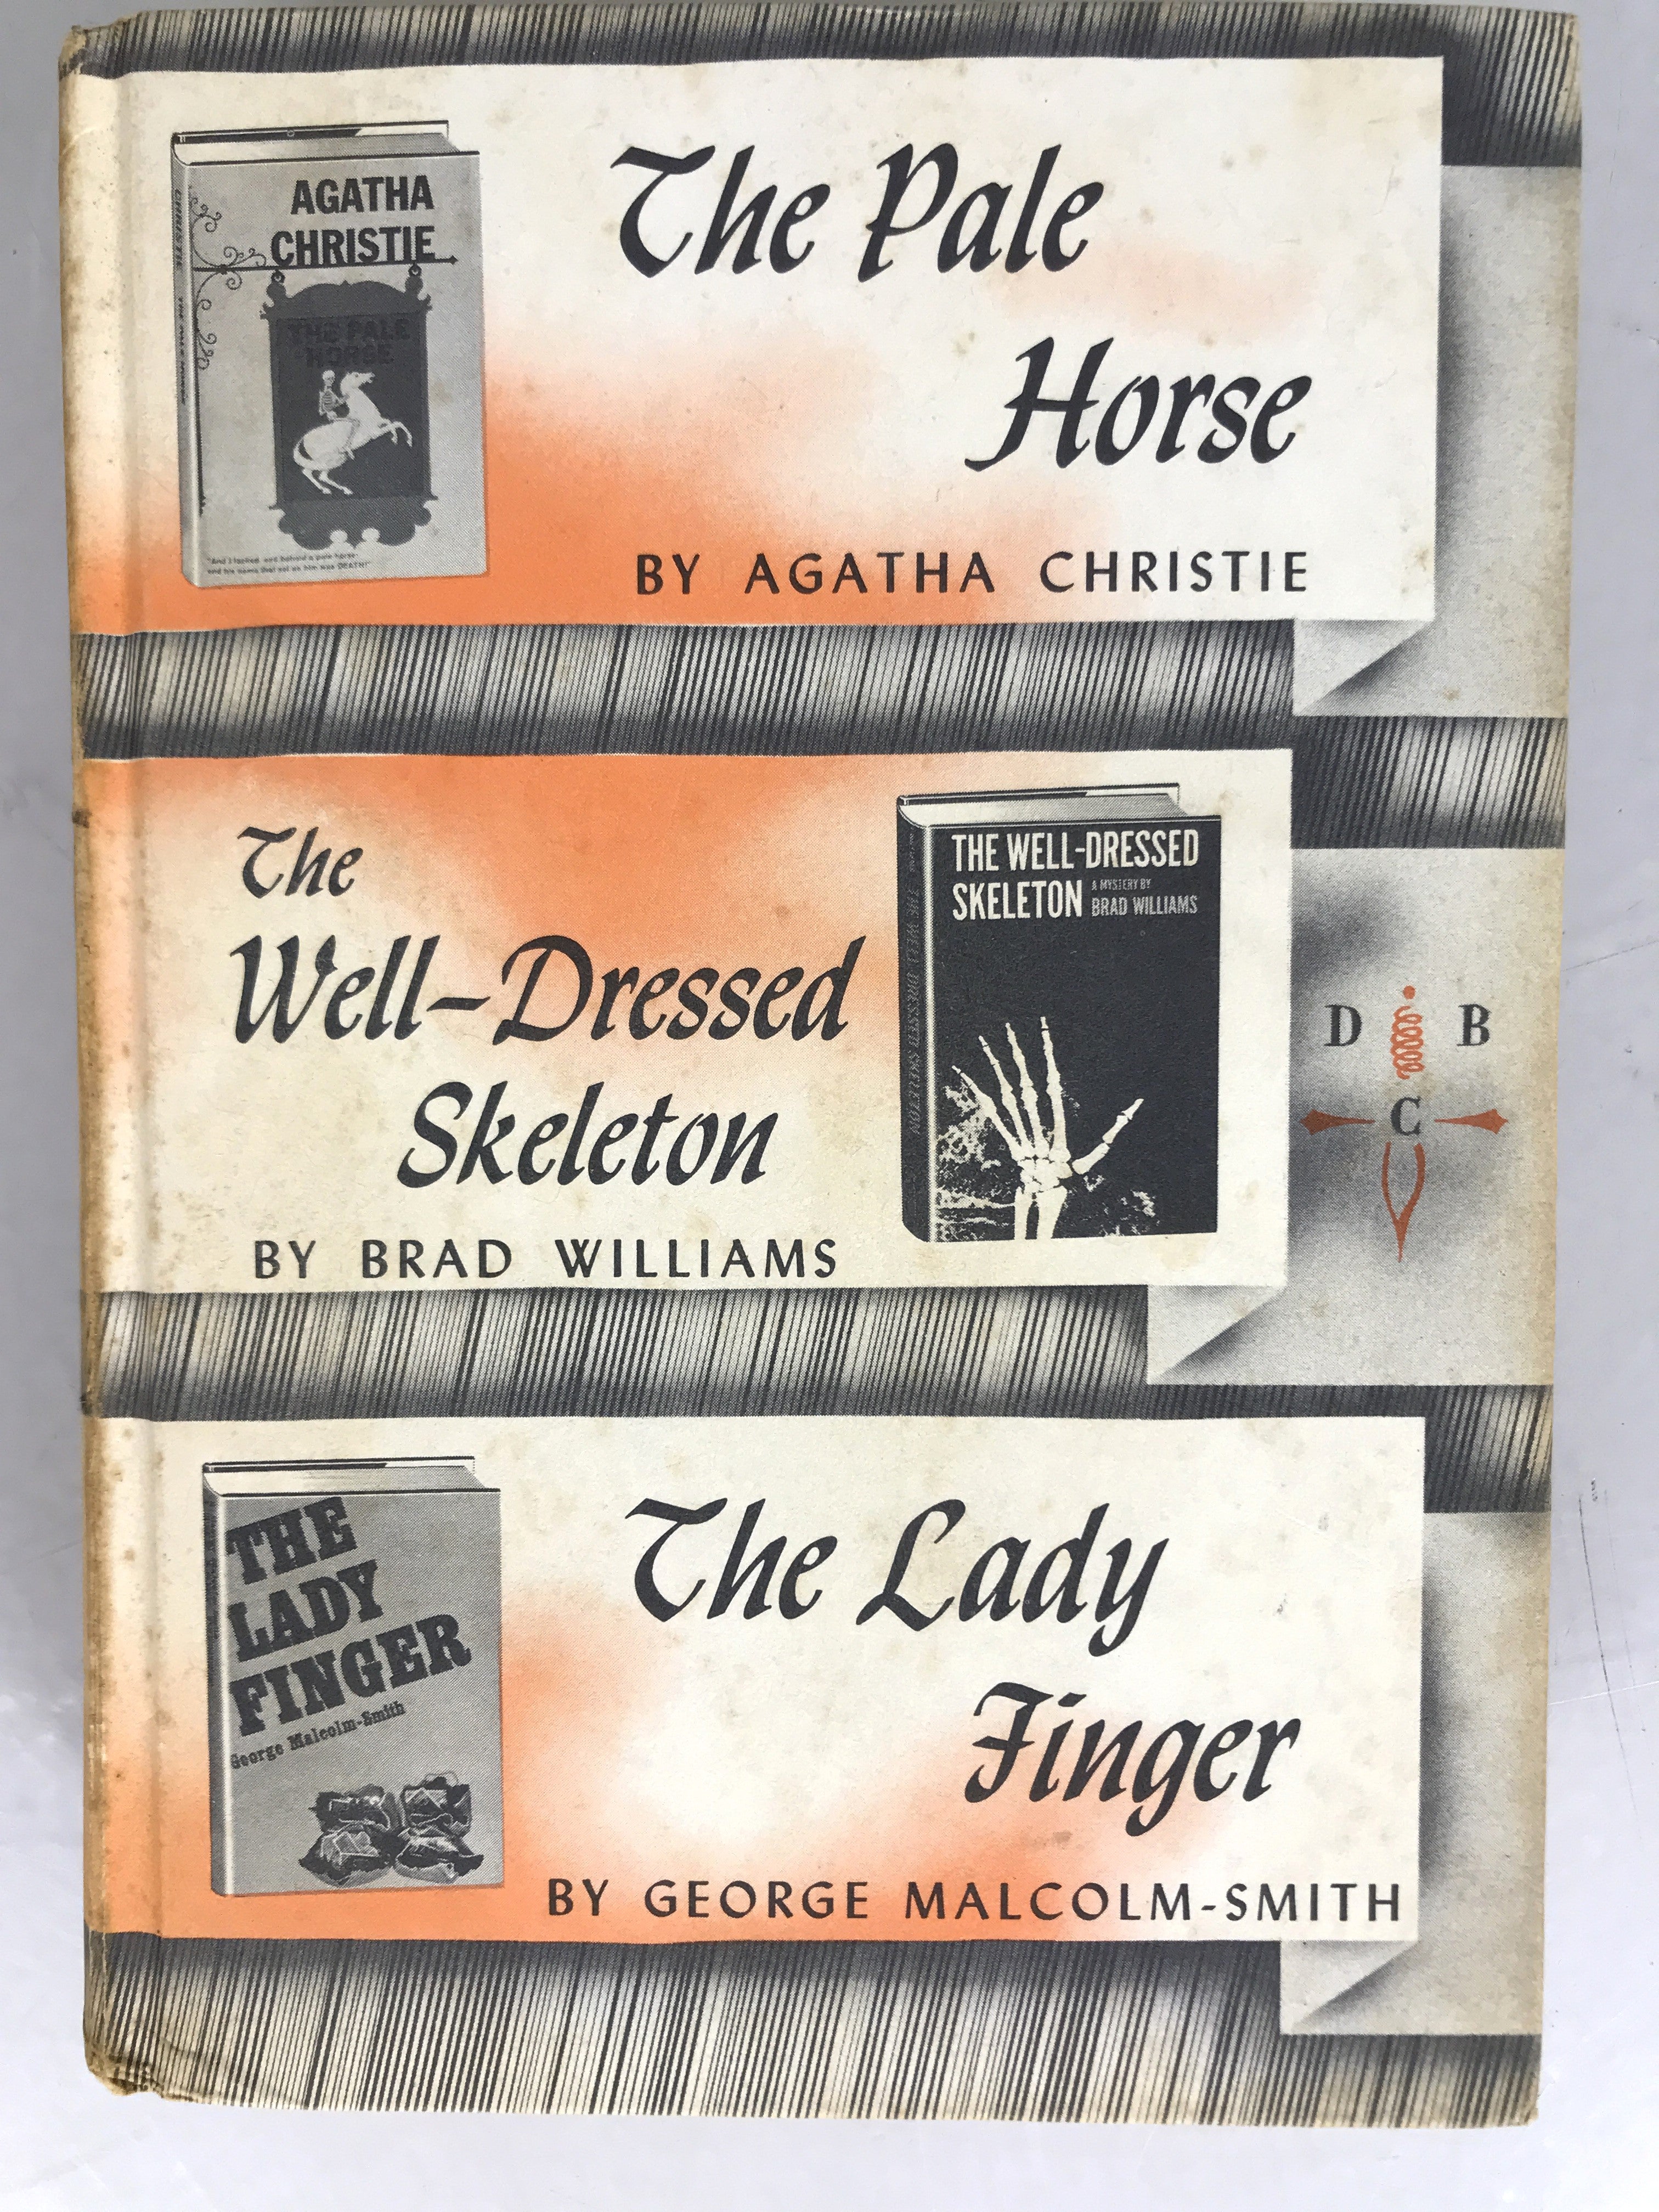 Lot of 3 Detective Book Club Mystery Books: Agatha Christie, Georges Simenon, Frances Crane and Others 1953-1962 HC